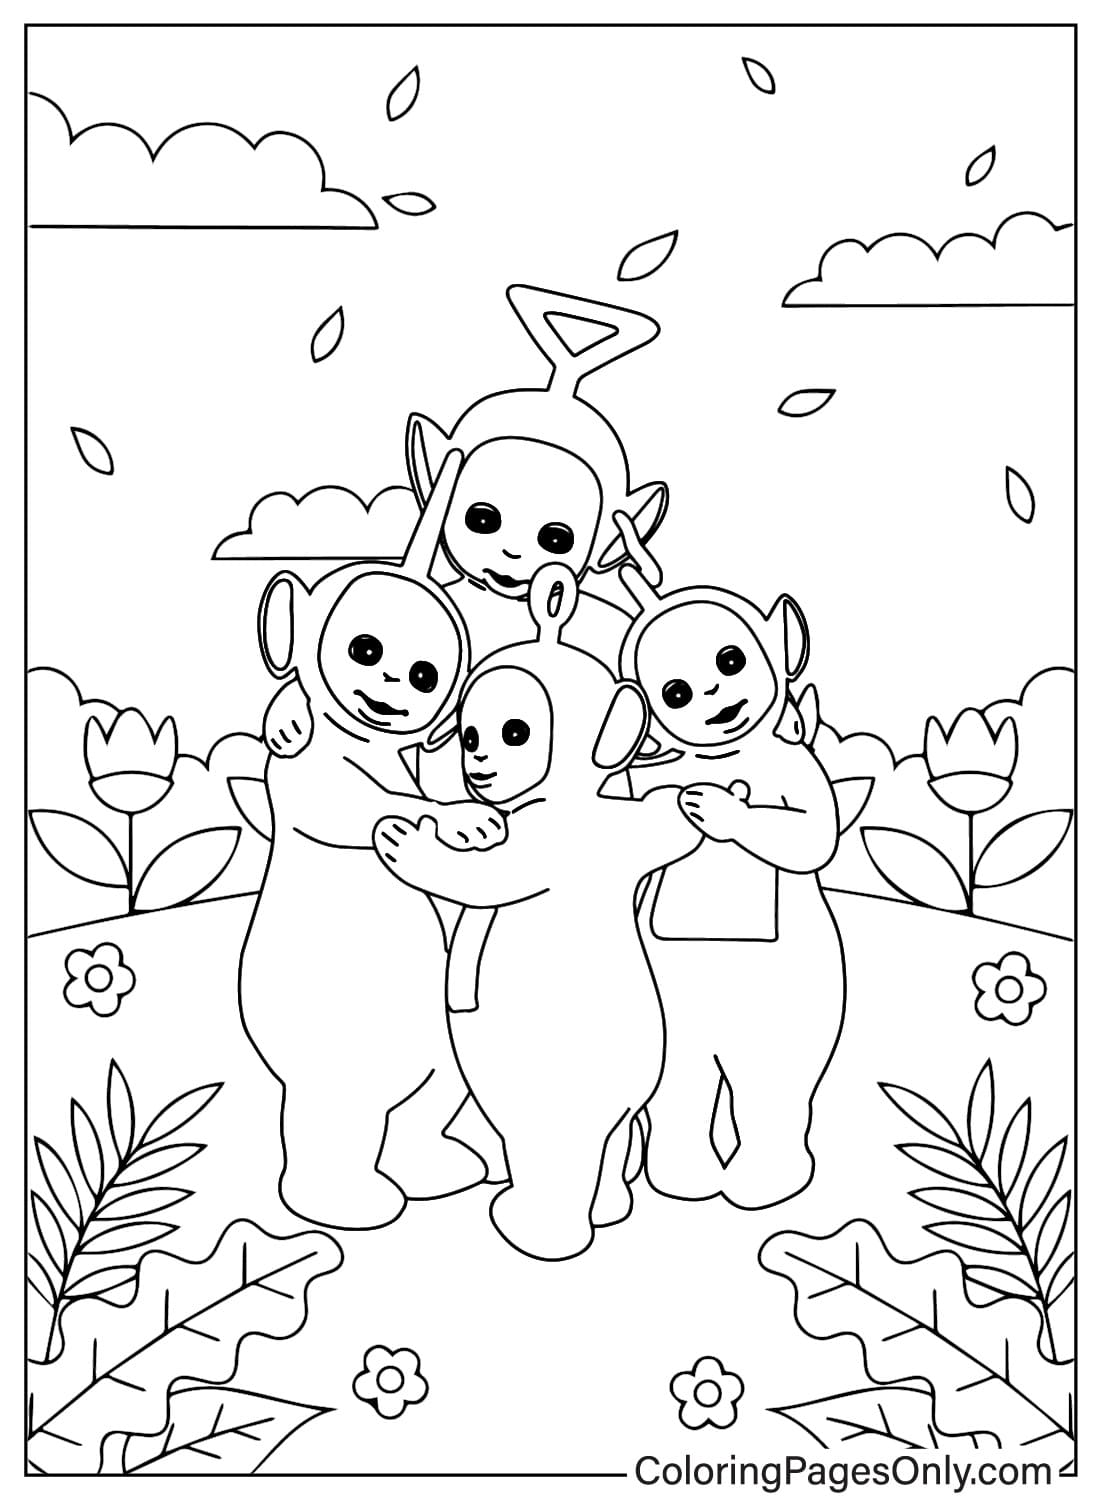 Teletubbies – WildBrain Coloring Page from Teletubbies - WildBrain